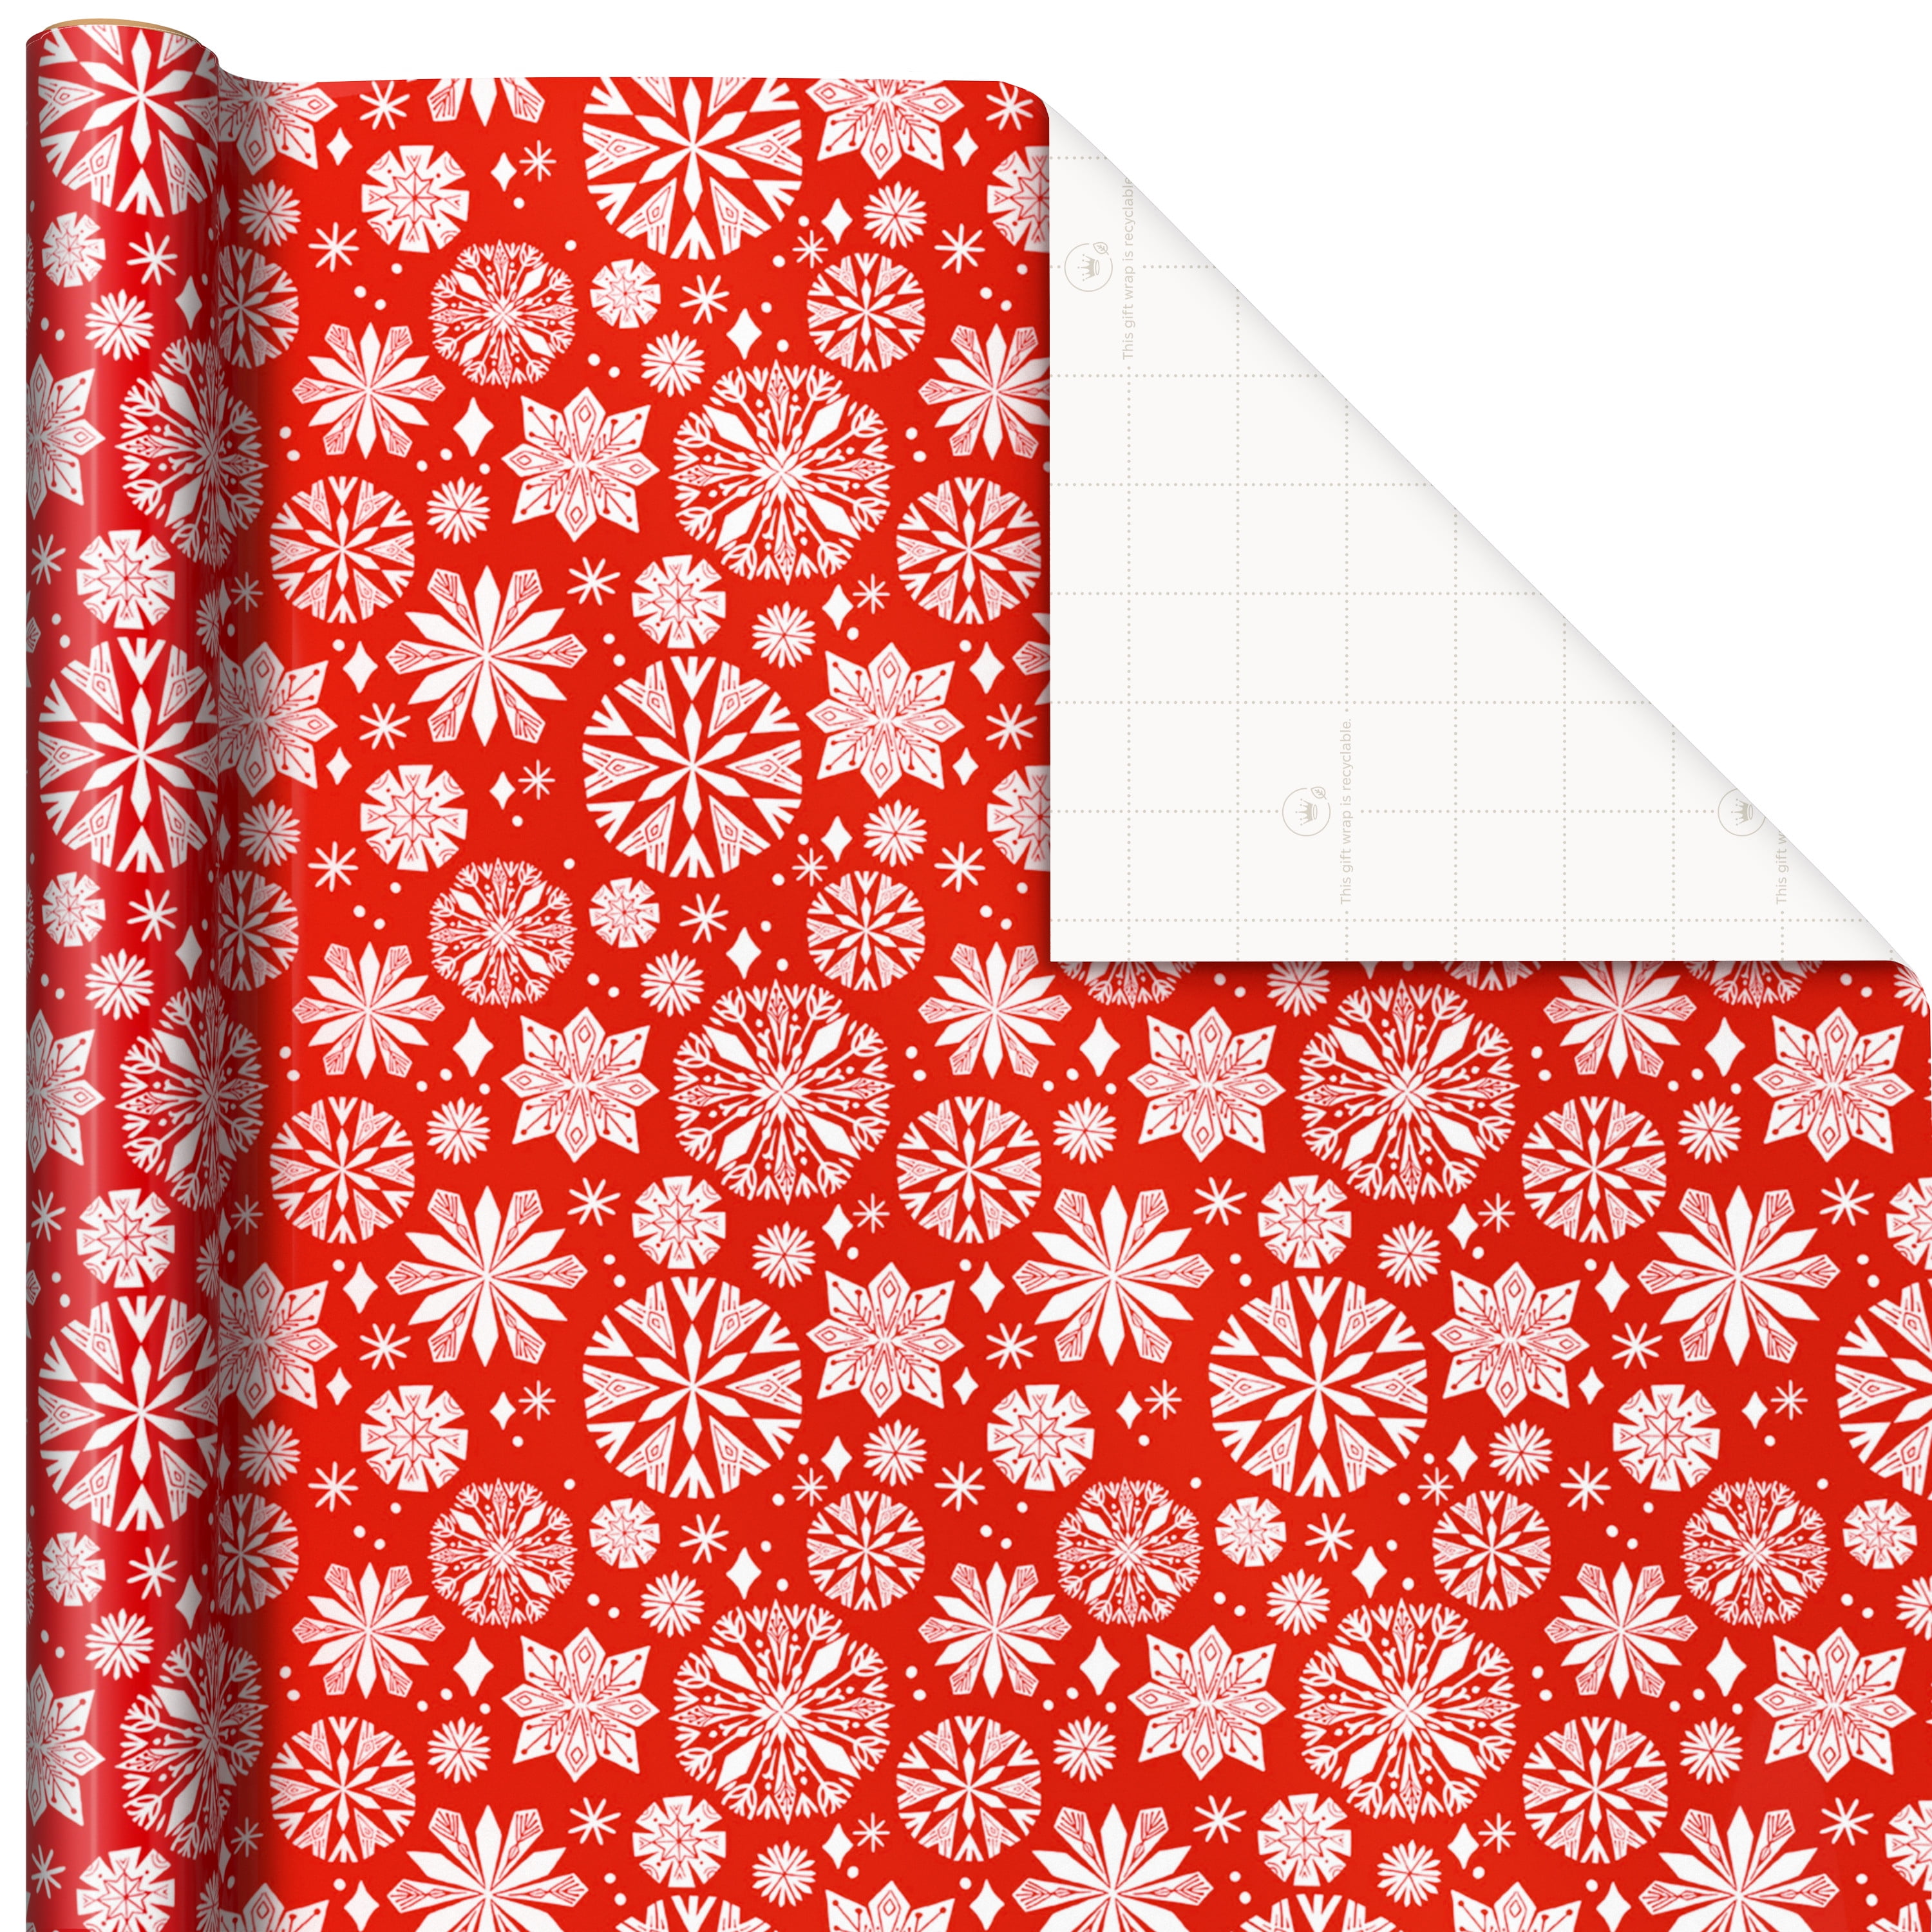 Hallmark Christmas Gift Wrap Accessories Kit (decorative Trim and Gift Tags with String) Natural Snowflakes, Reindeer, Red and White